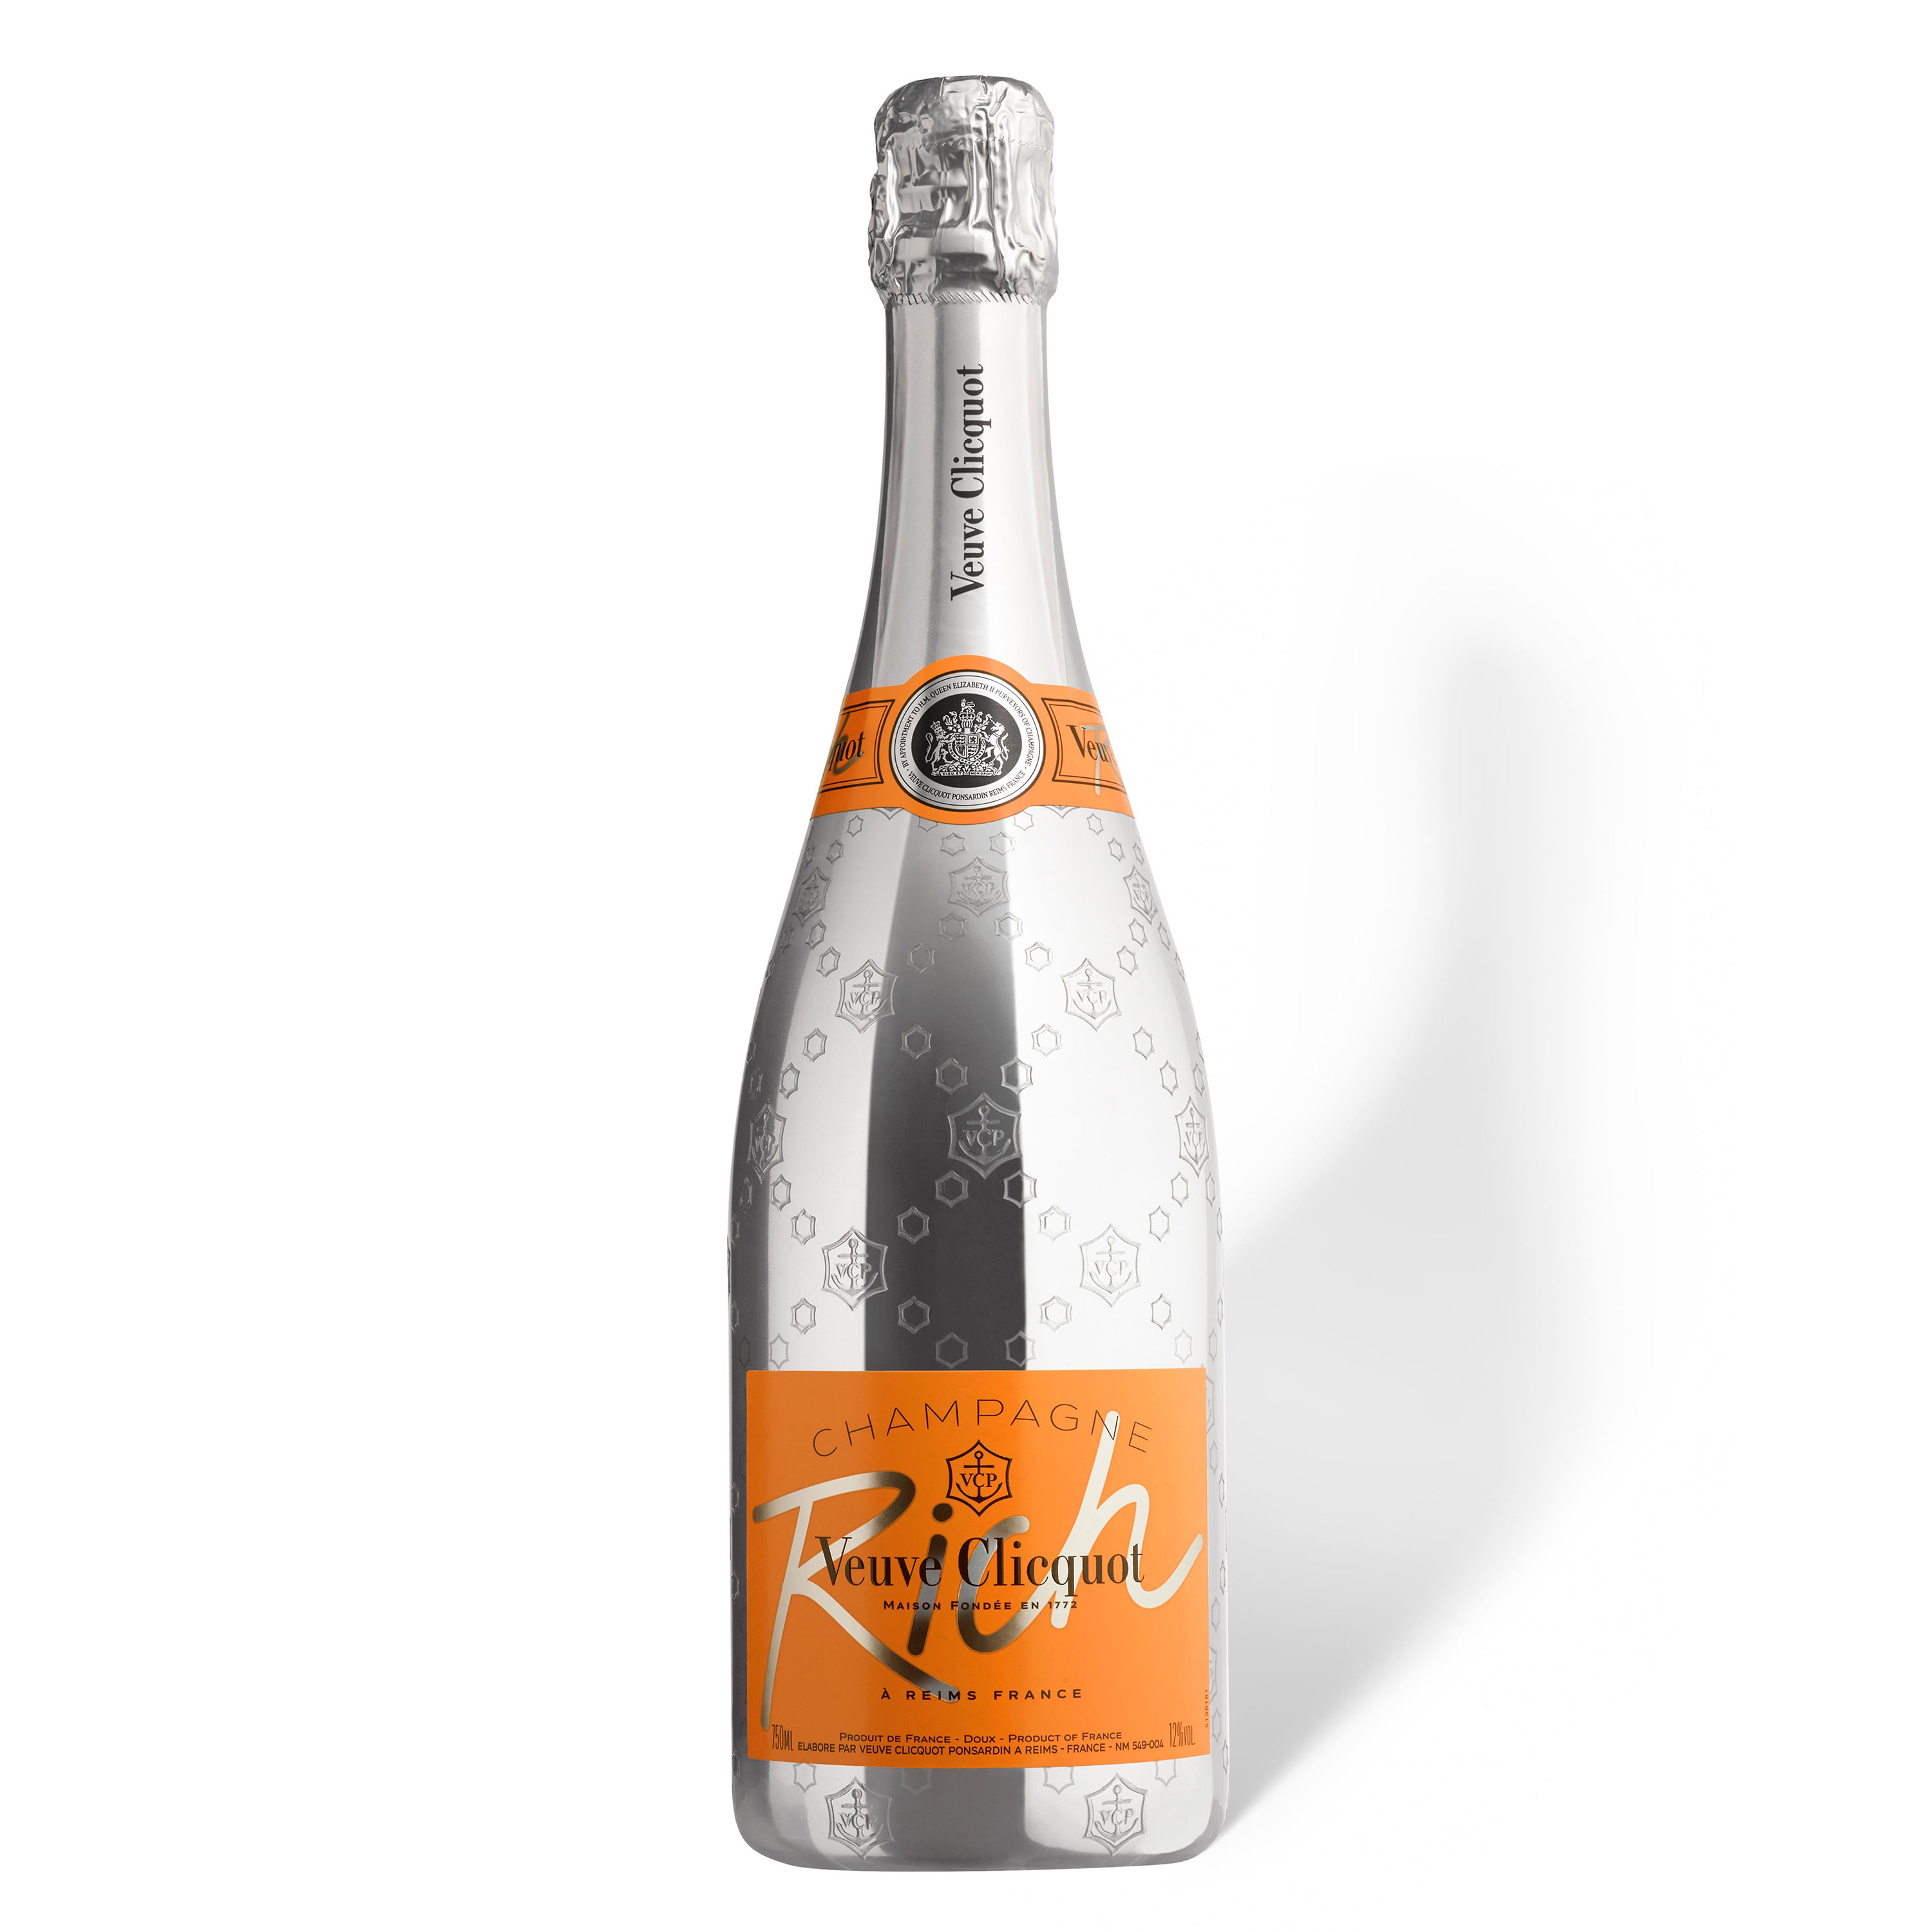 Veuve Clicquot Rich Champagne 75cl Great Price and Home Delivery